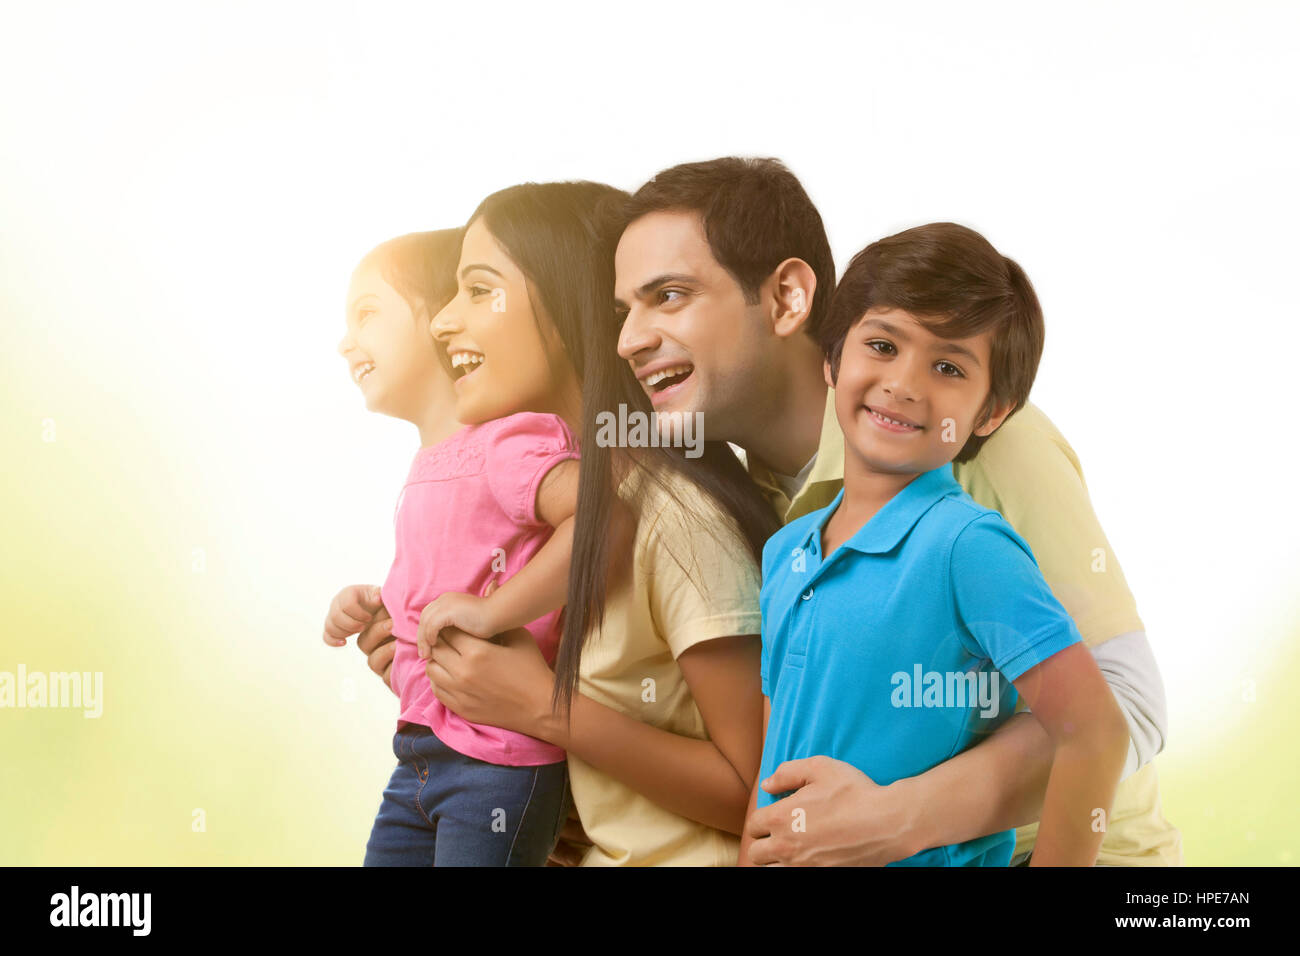 Side view of happy young family against the clear sky Stock Photo